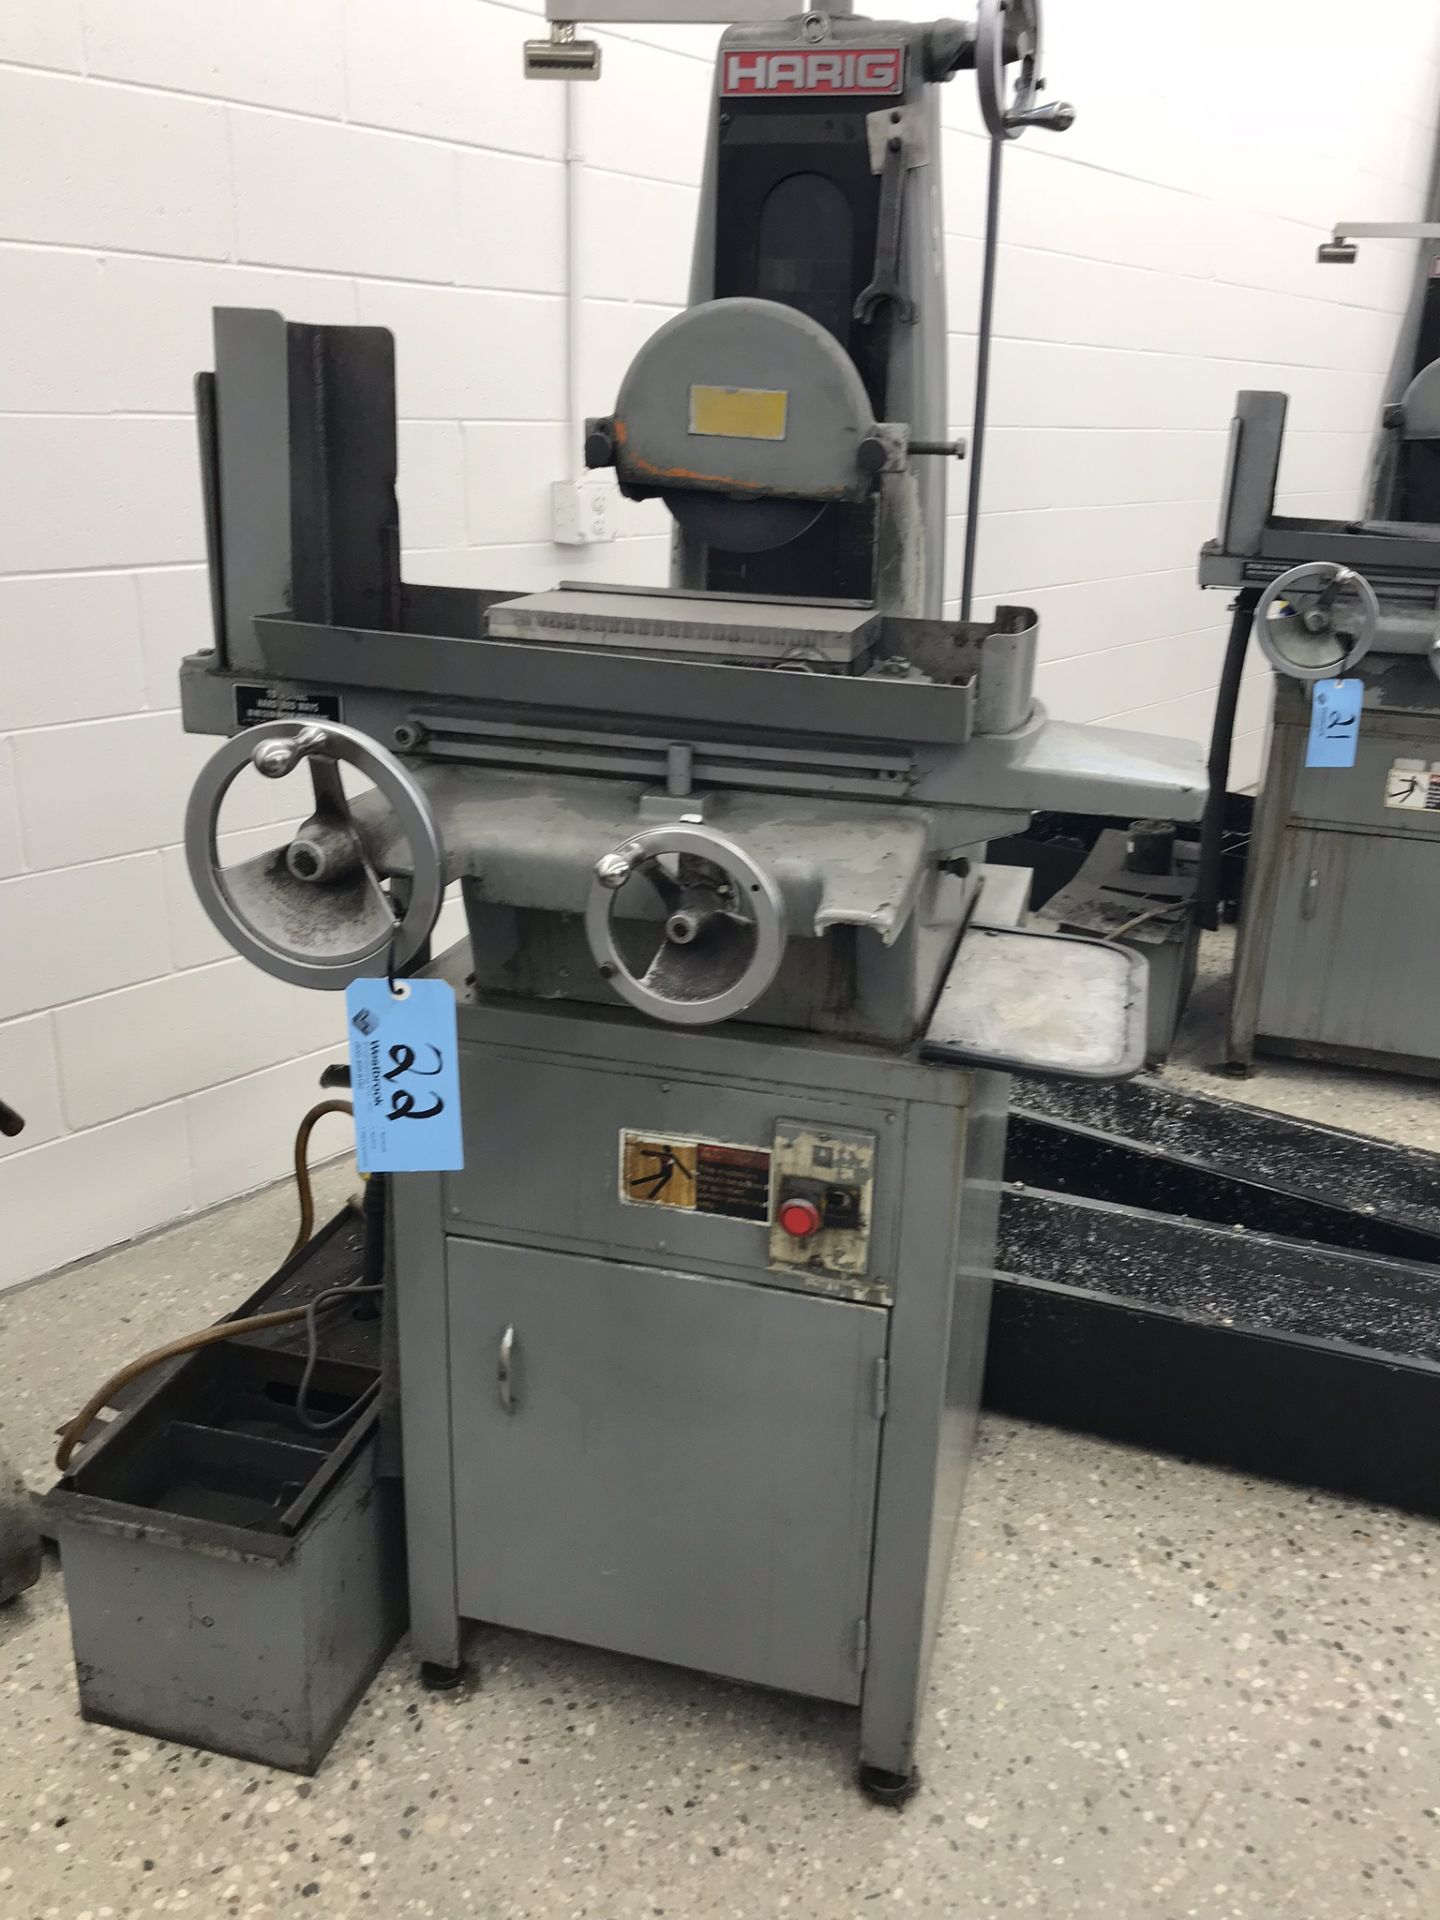 Harig 612 6" x 12" Surface Grinder, 6" x 12" Permanent Magnetic Chuck, Coolant